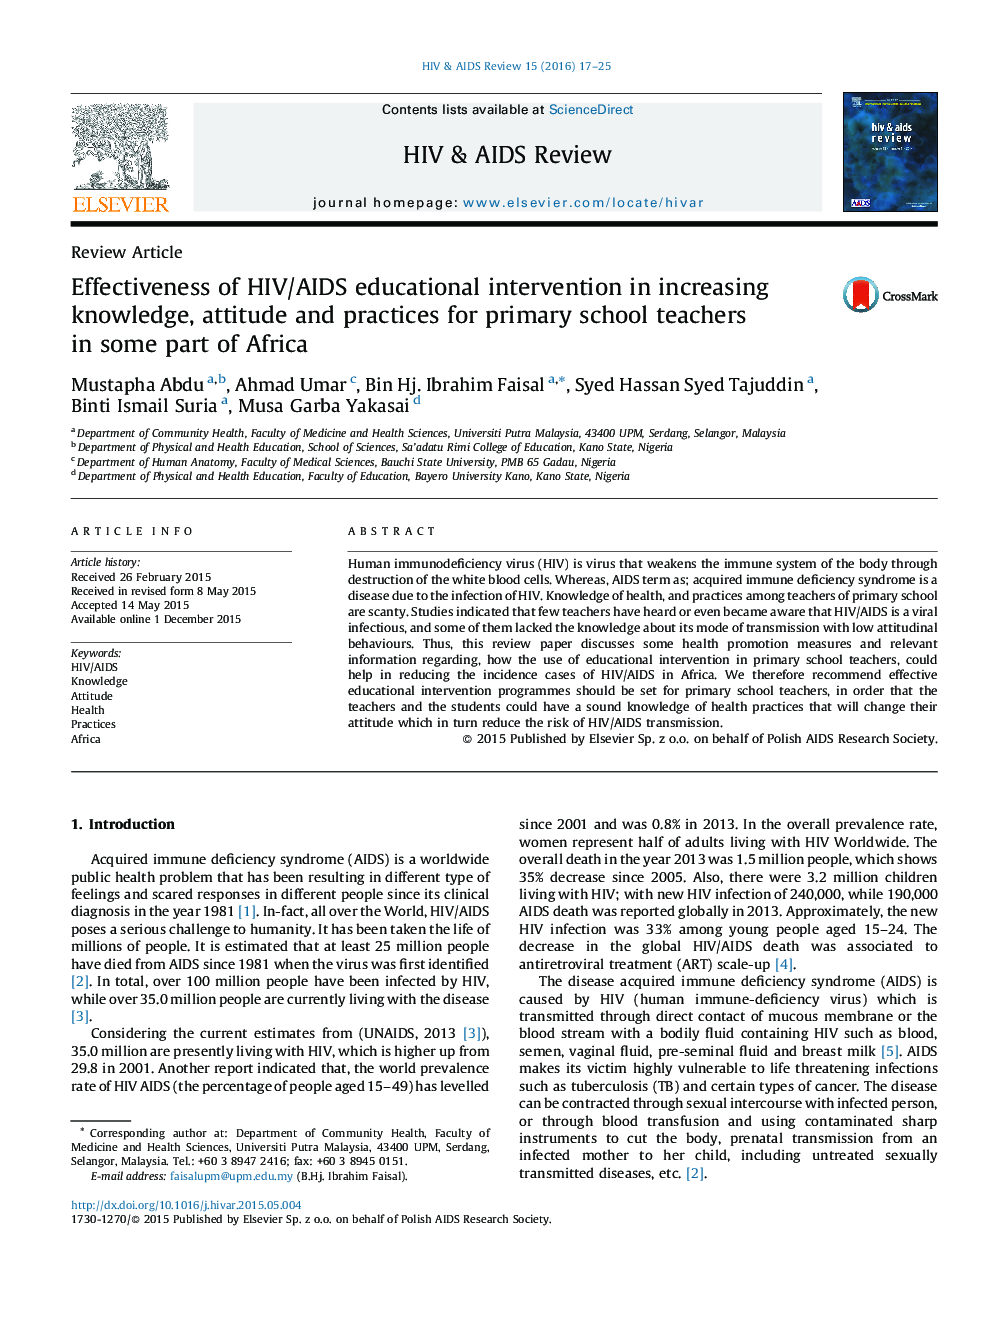 Effectiveness of HIV/AIDS educational intervention in increasing knowledge, attitude and practices for primary school teachers in some part of Africa